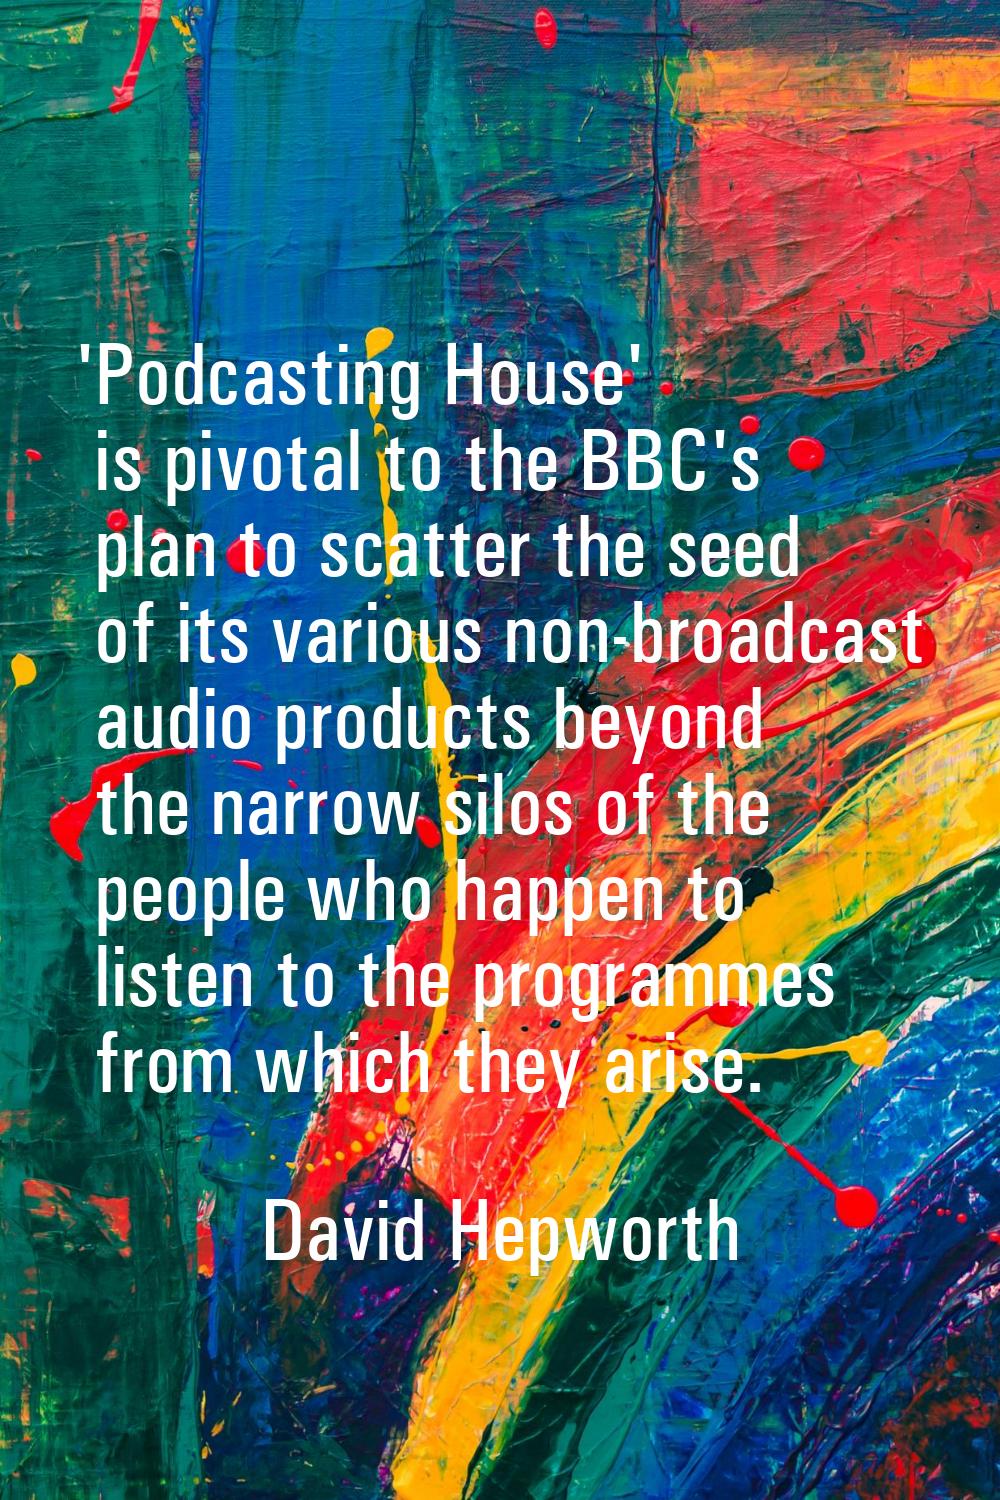 'Podcasting House' is pivotal to the BBC's plan to scatter the seed of its various non-broadcast au